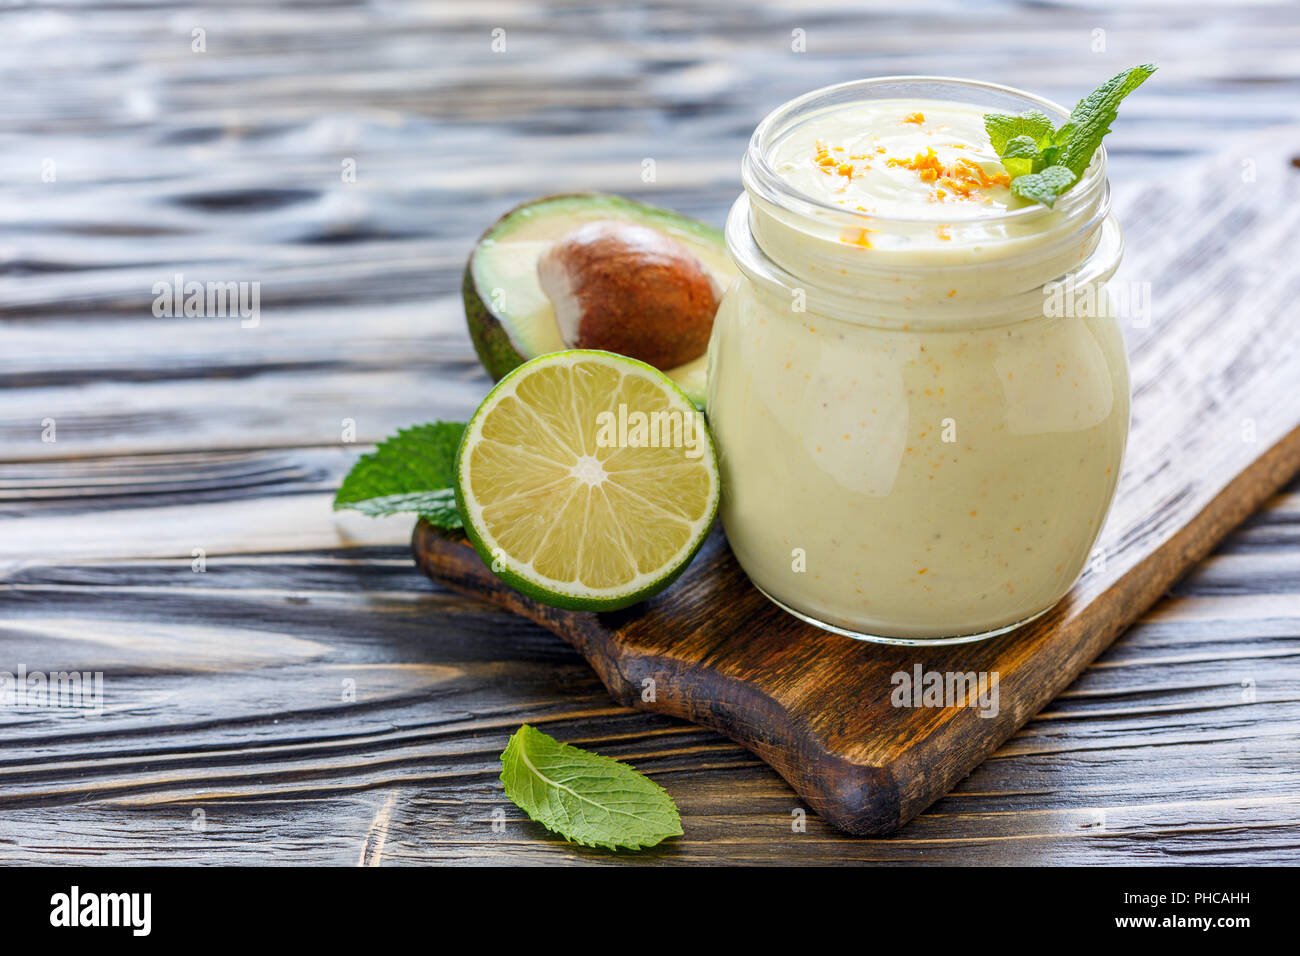 Useful smoothies of avocado in a glass jar. Stock Photo